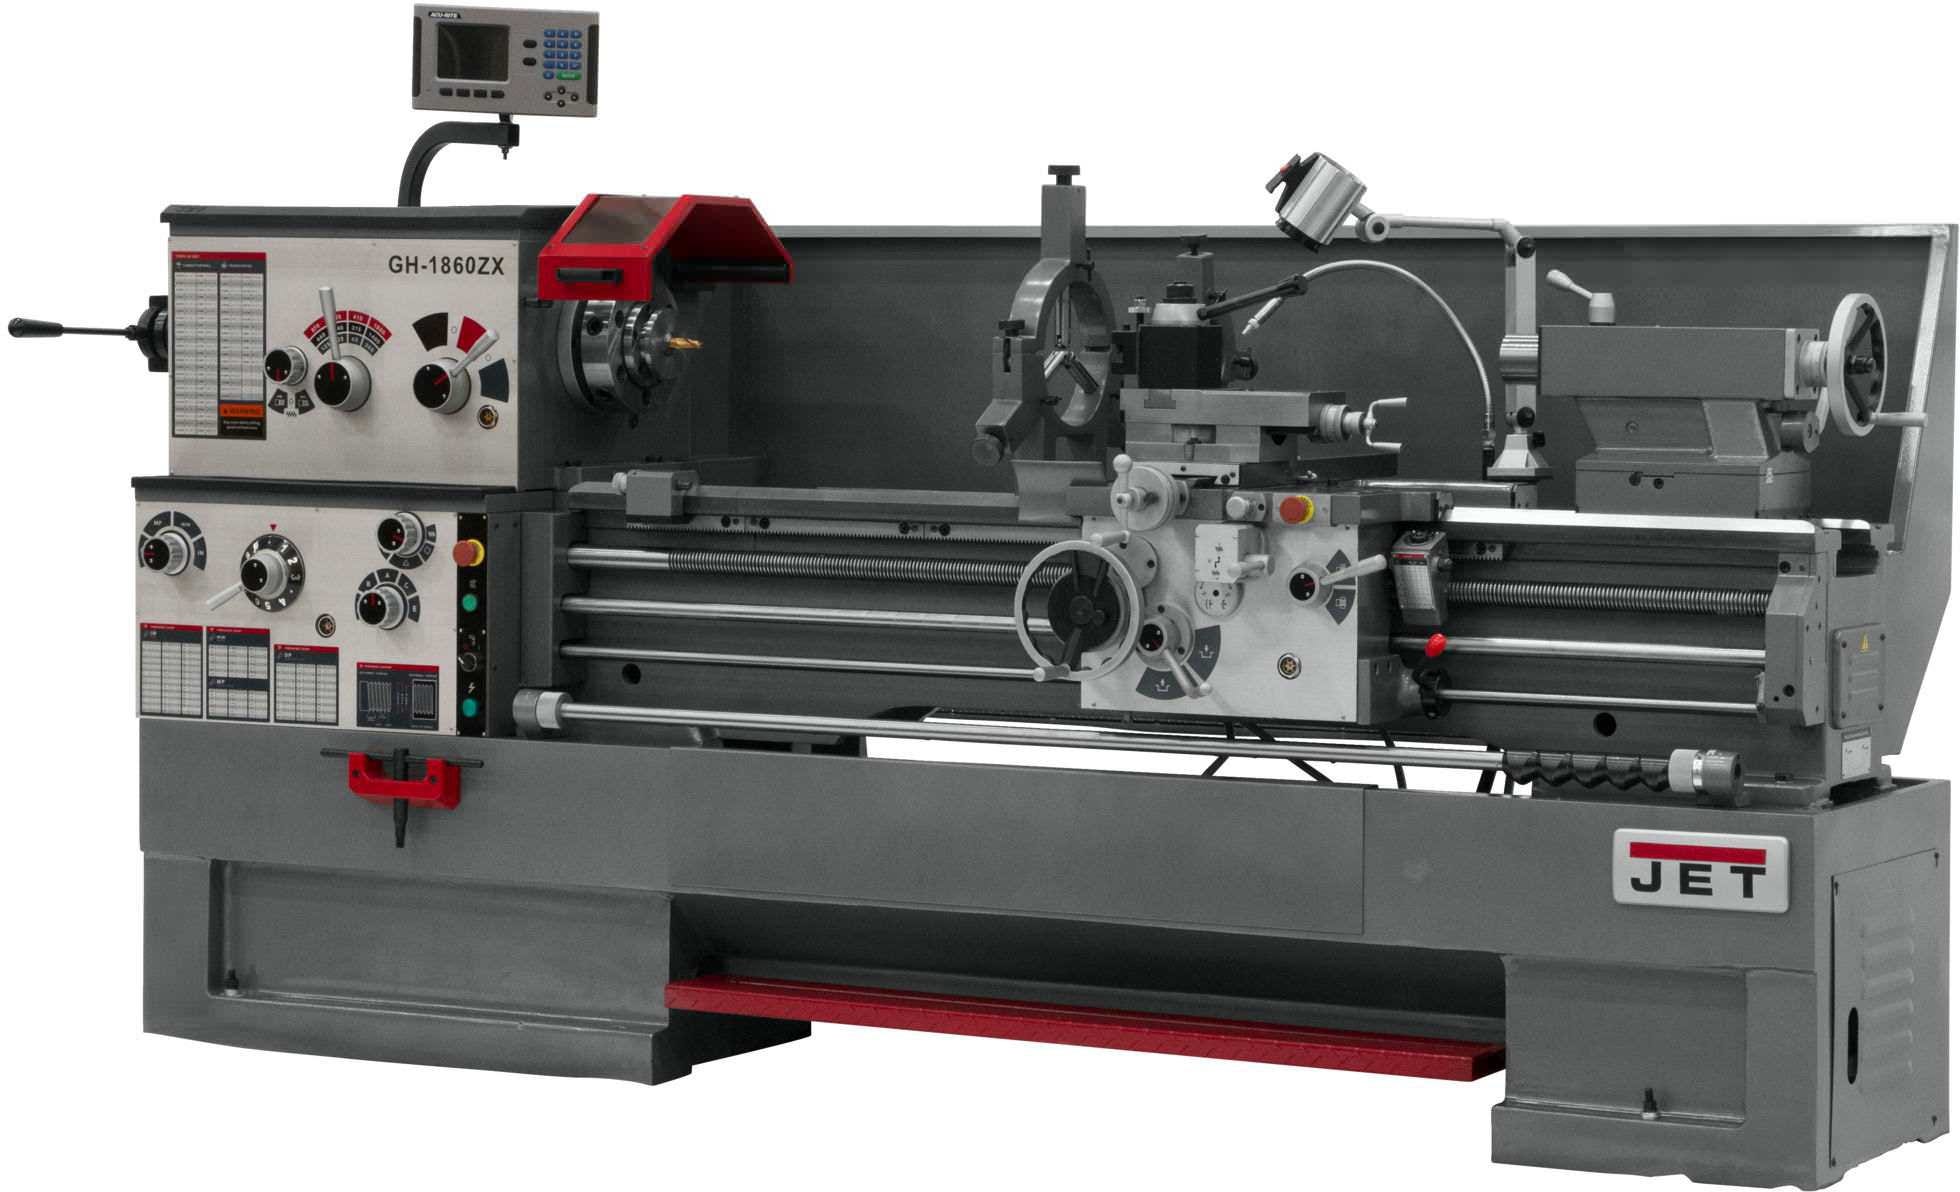 Jet 321583 GH 1880ZX Lathe With Newall DP700 DRO With Collet Closer